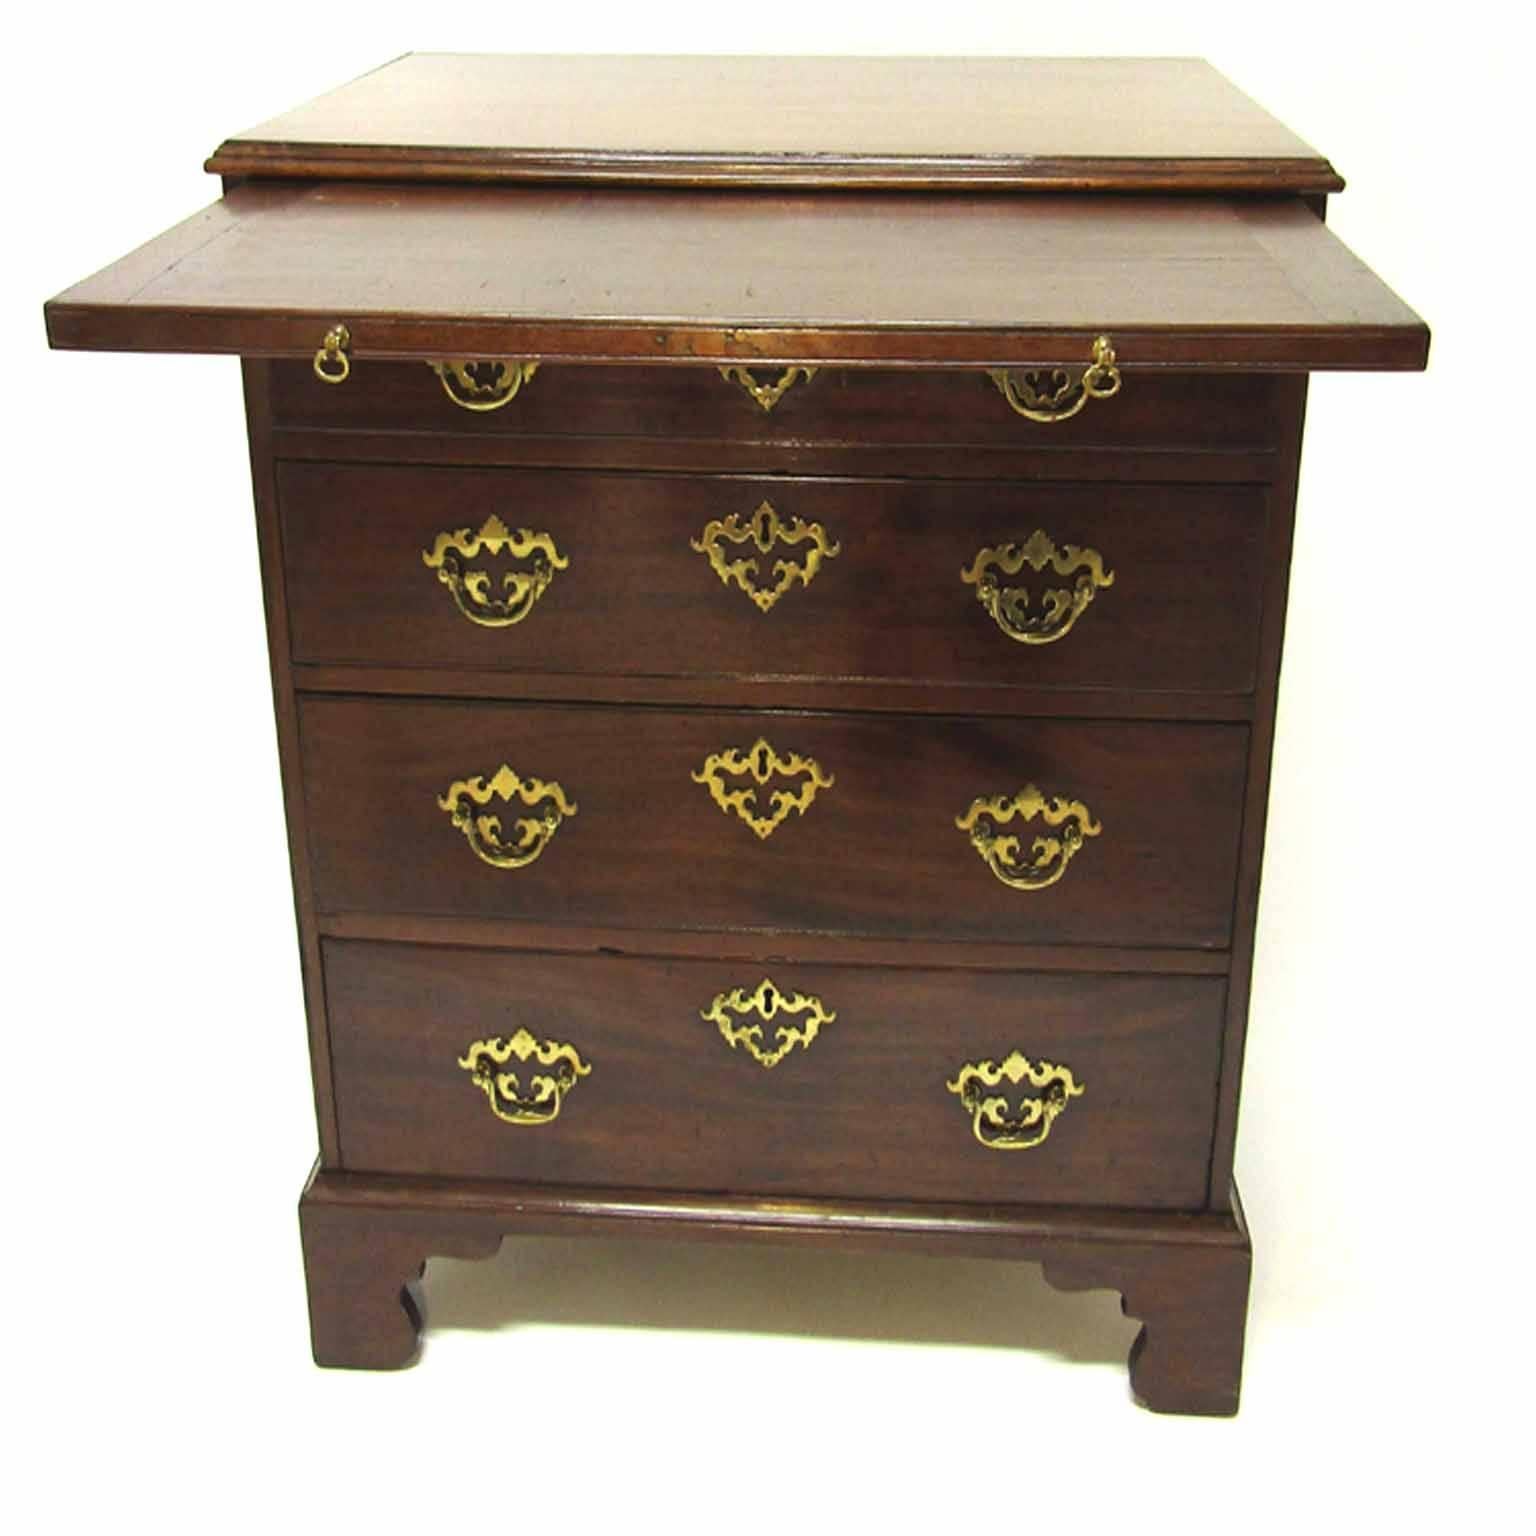 Bachelor's chest of rectangular from with a shaped edge over a brushing slide, over four graduated drawers having original brass pierced bail handles and side handles, raised on bracket feet, circa 1760.